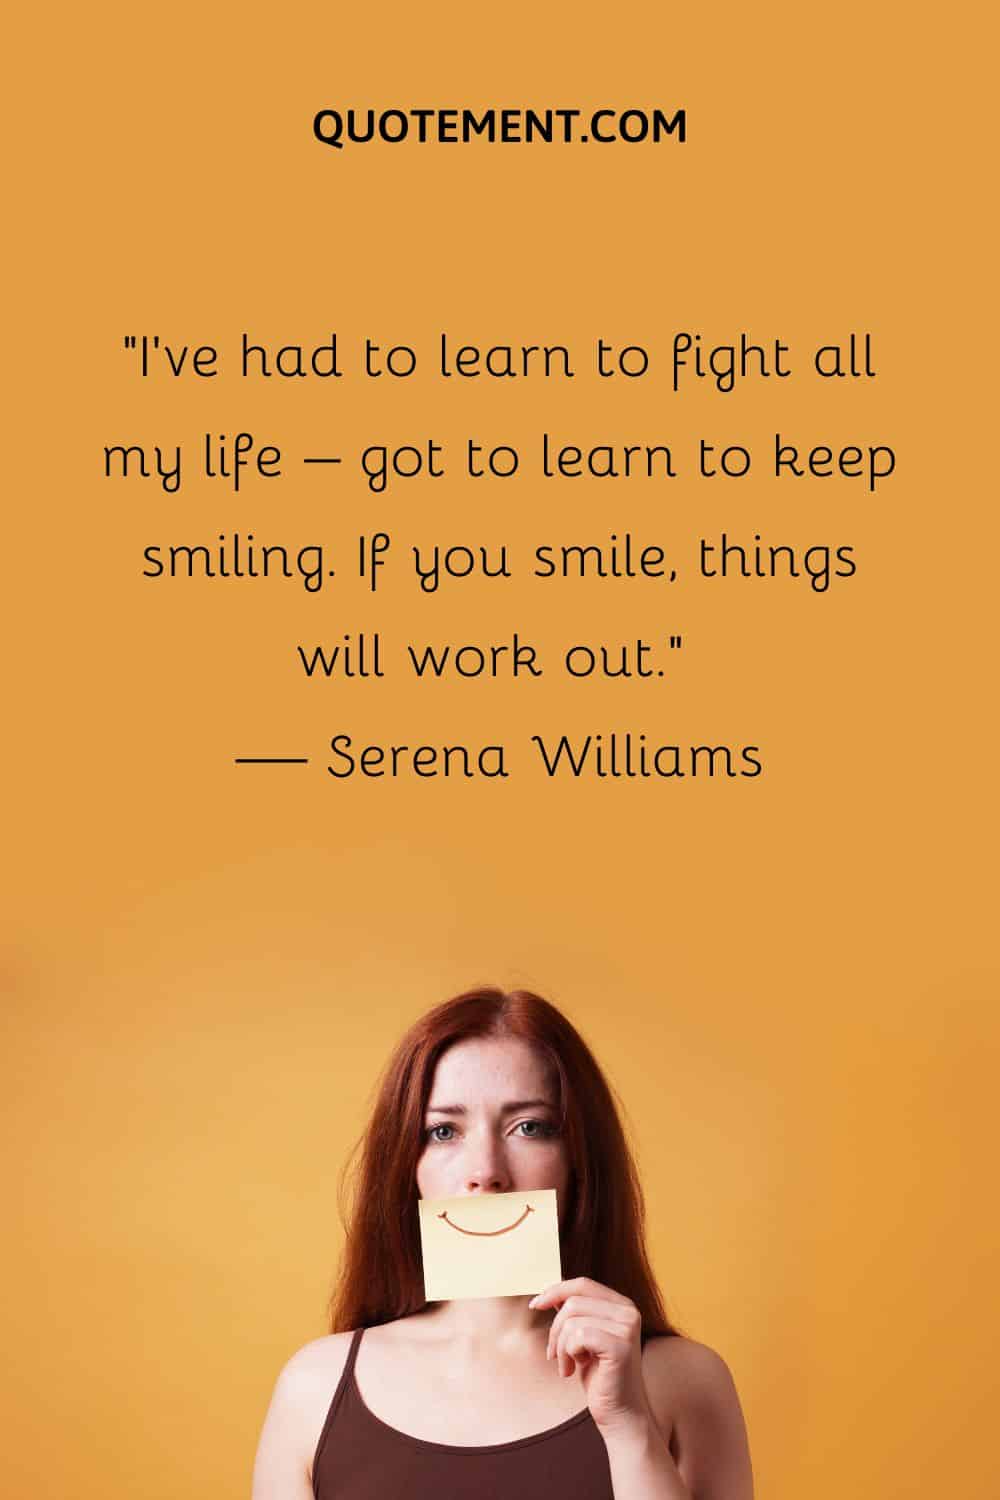 I’ve had to learn to fight all my life – got to learn to keep smiling.